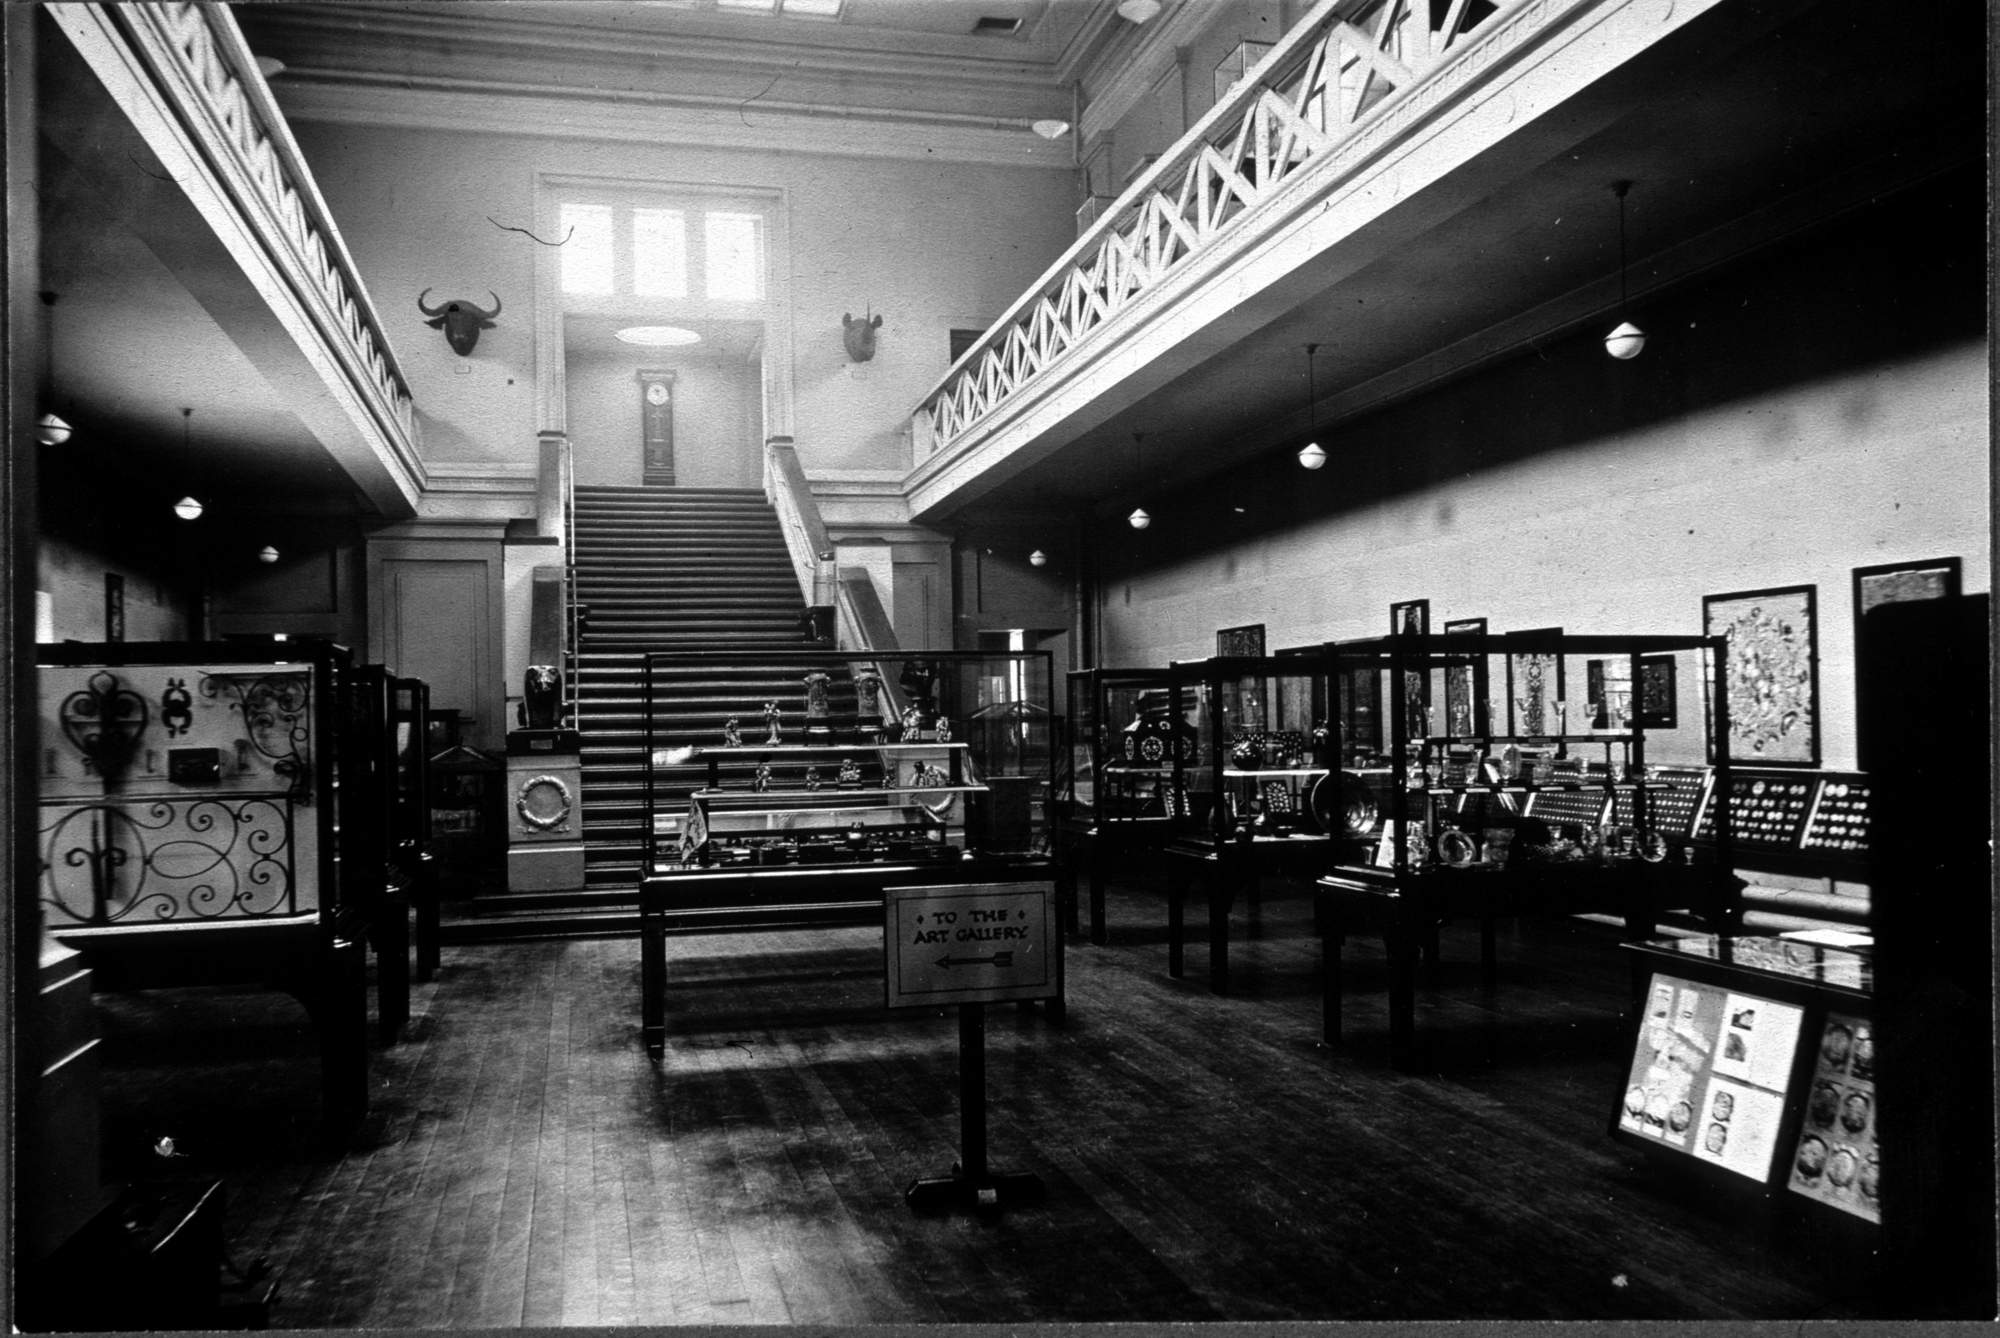 The Central Hall and staircase in the 1920s.